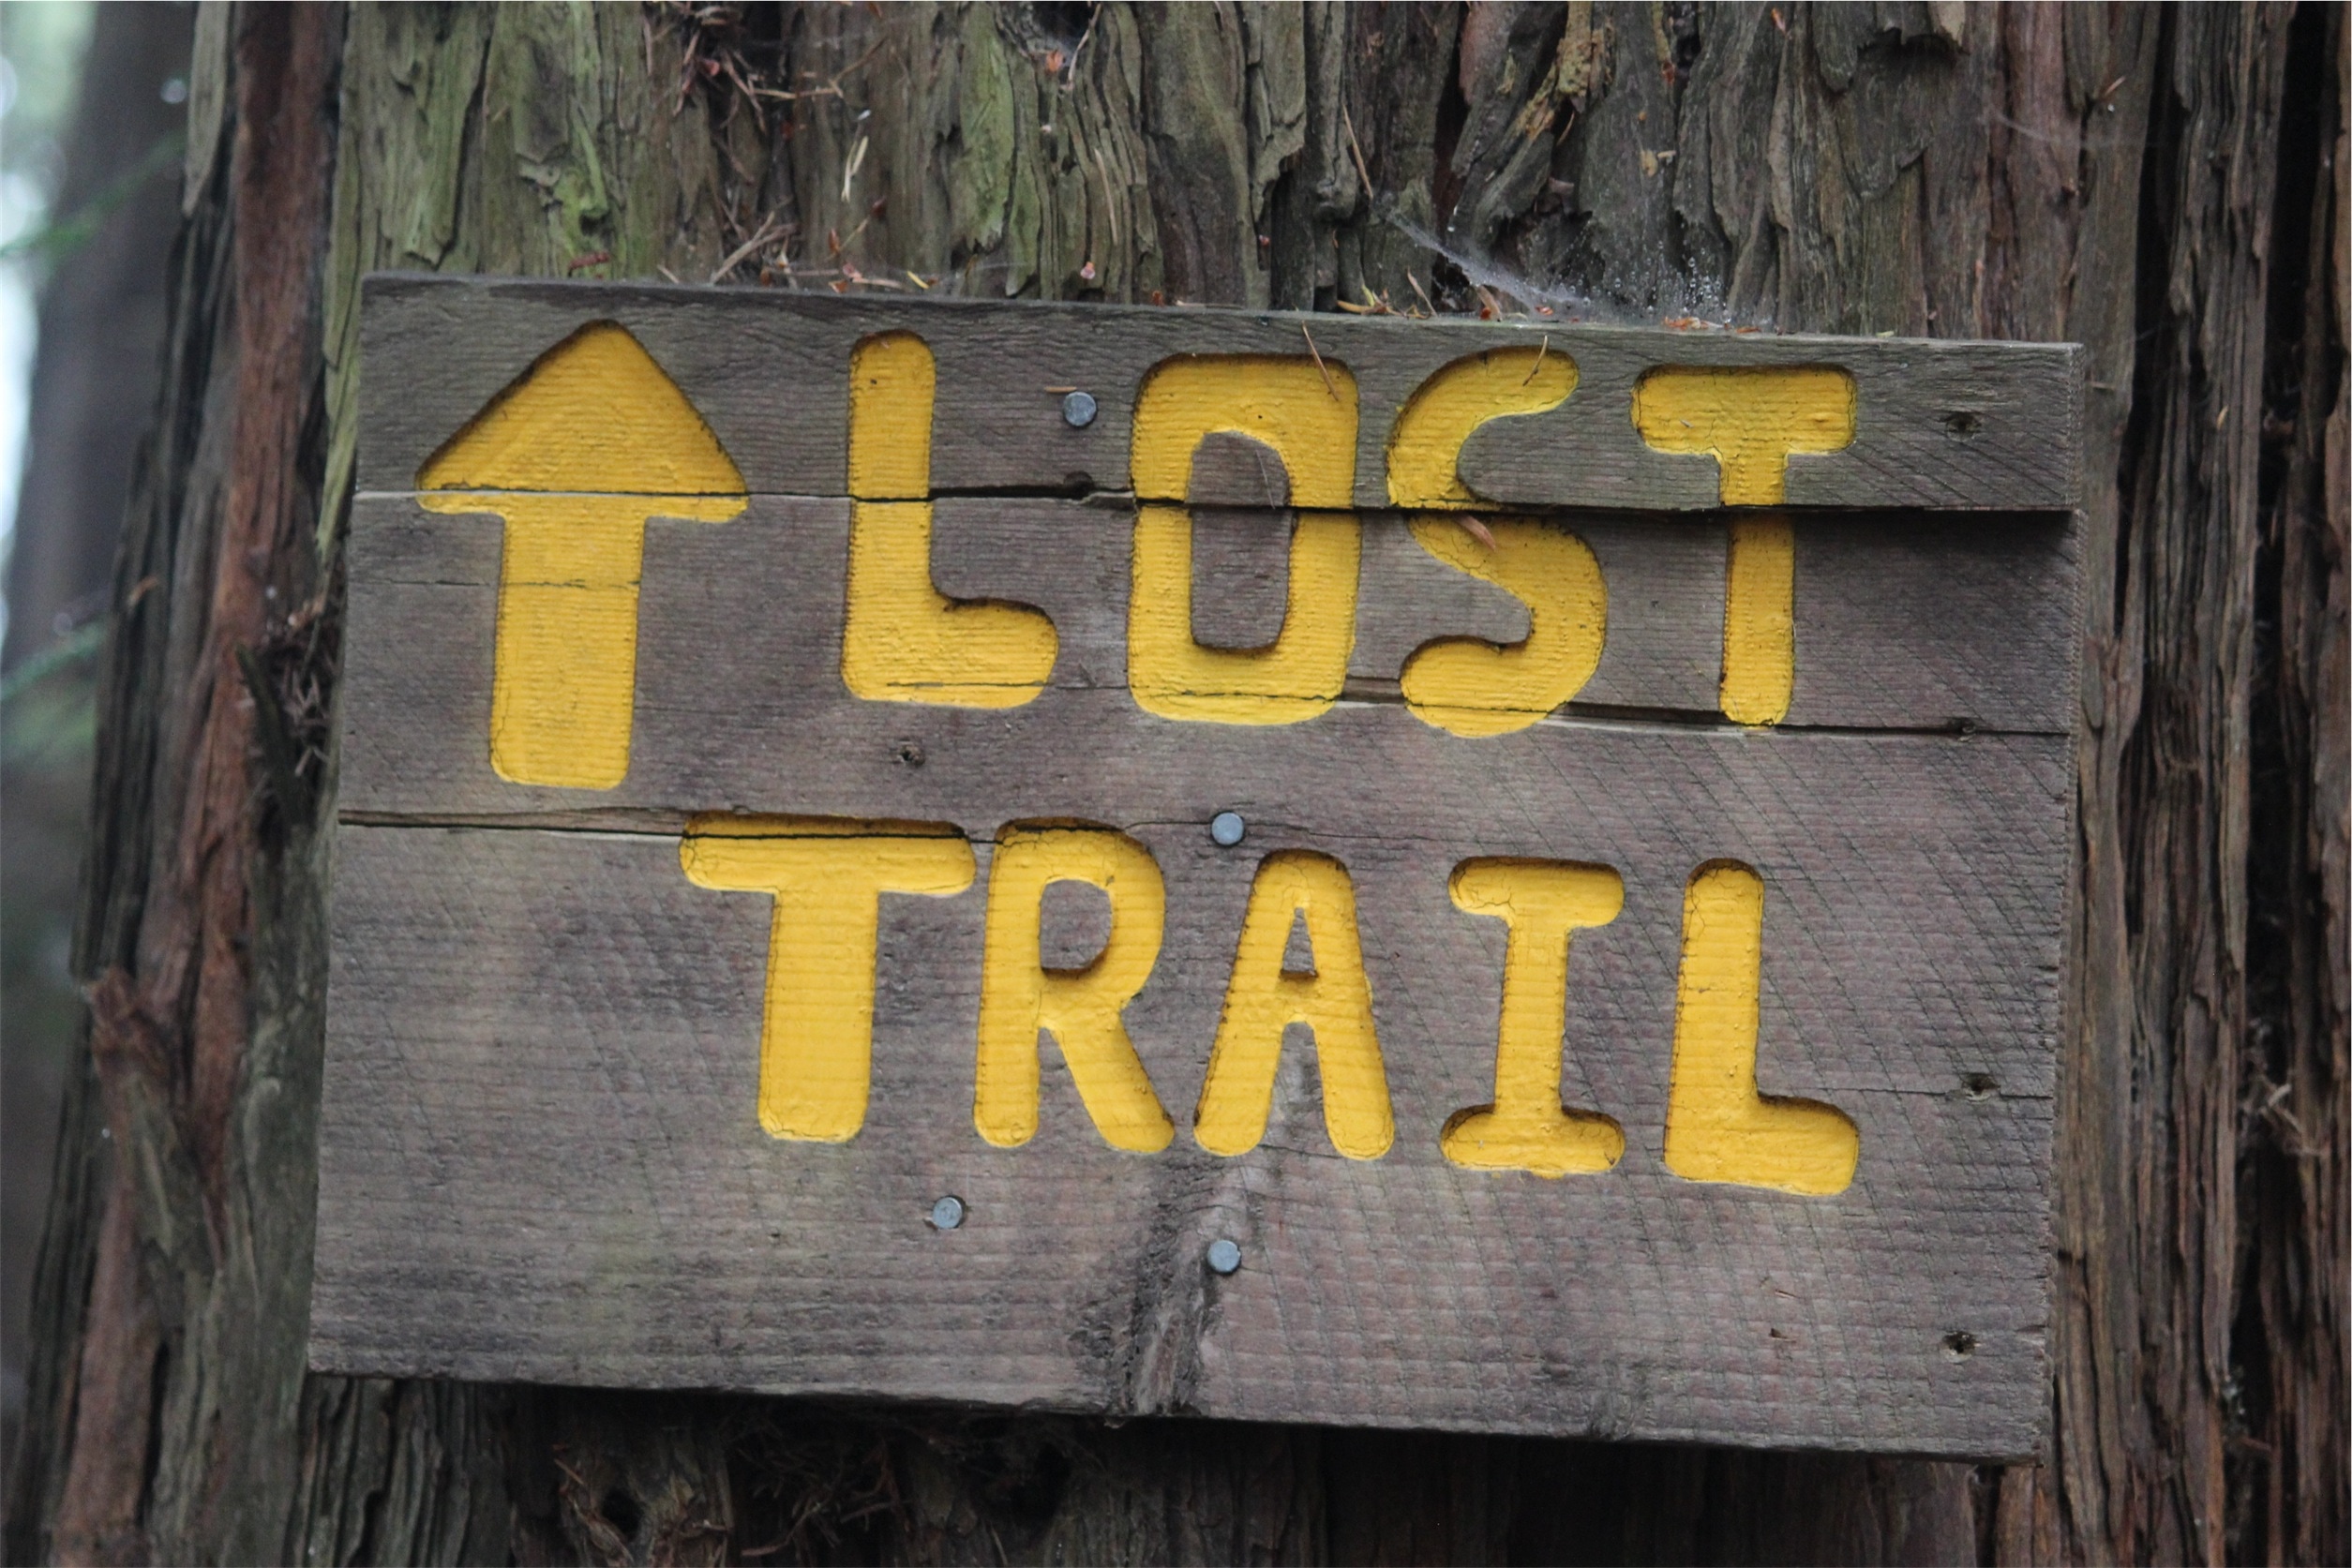 gray and yellow trail wooden signage